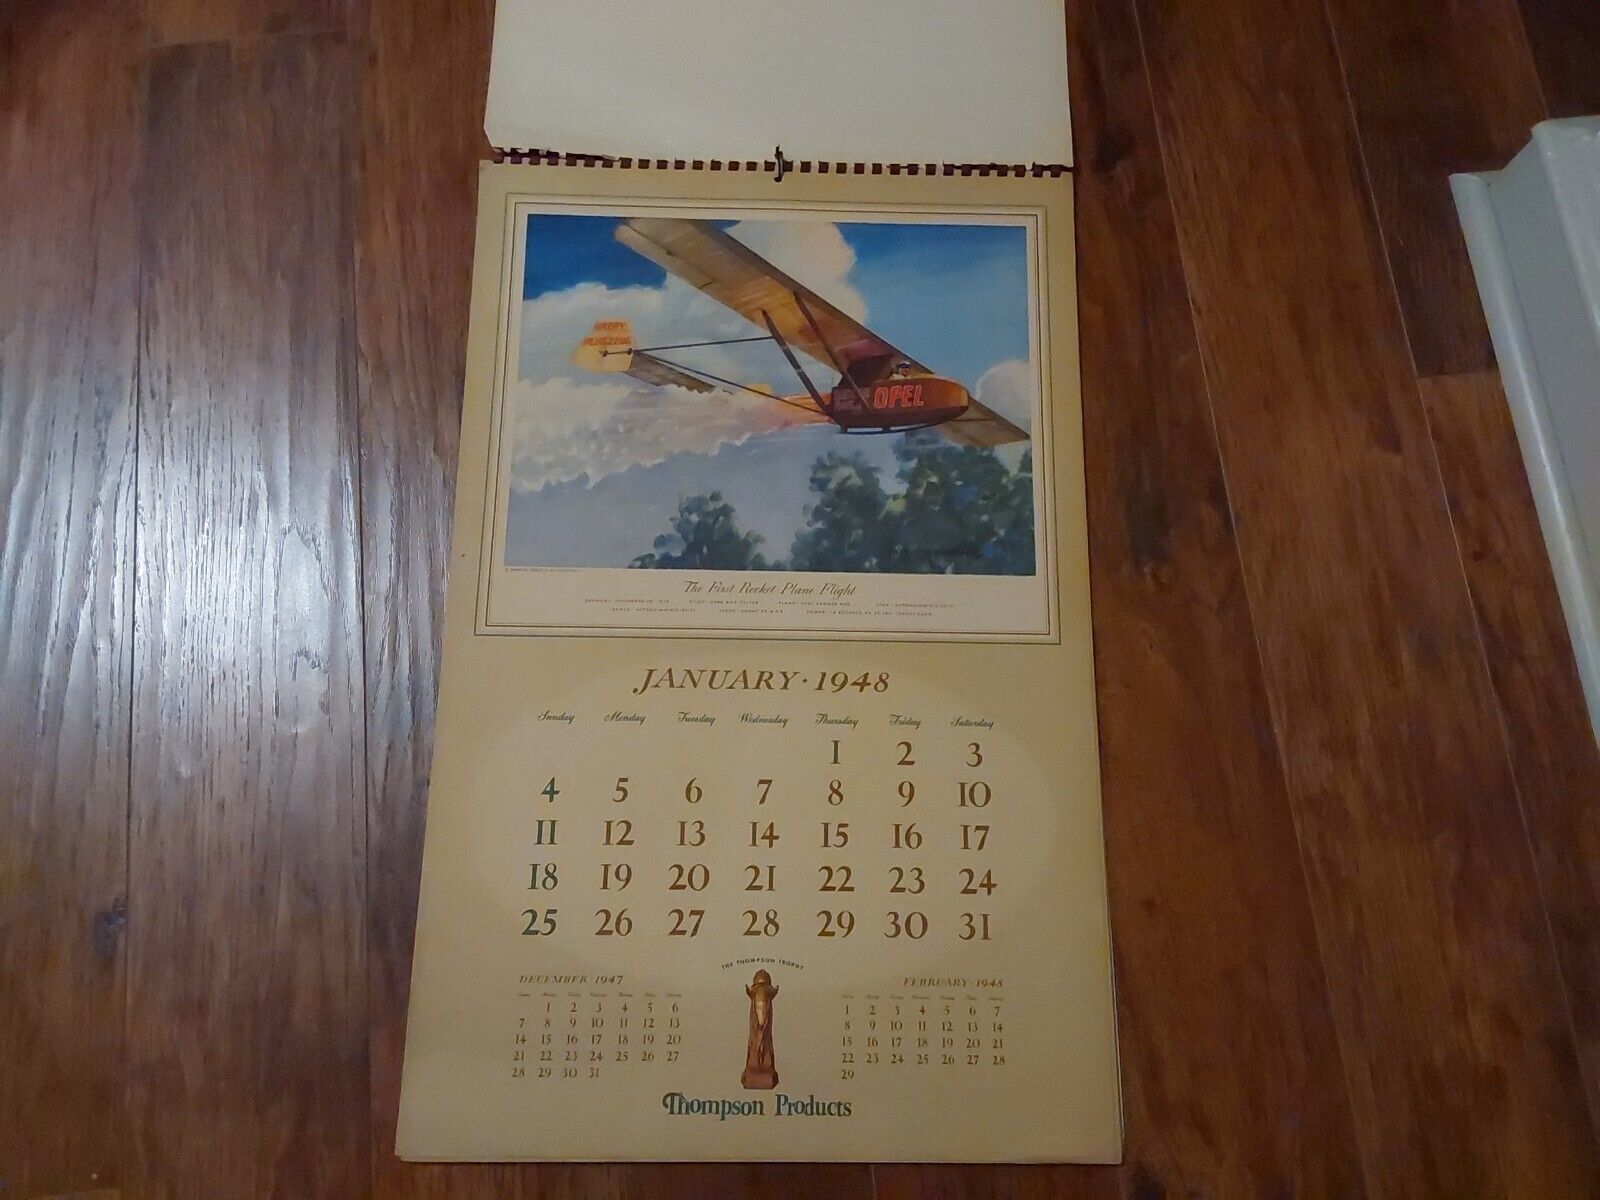 1948 THOMPSON Products WWII WAR AIRCRAFT Prints Calendar Charles Hubbell FULL